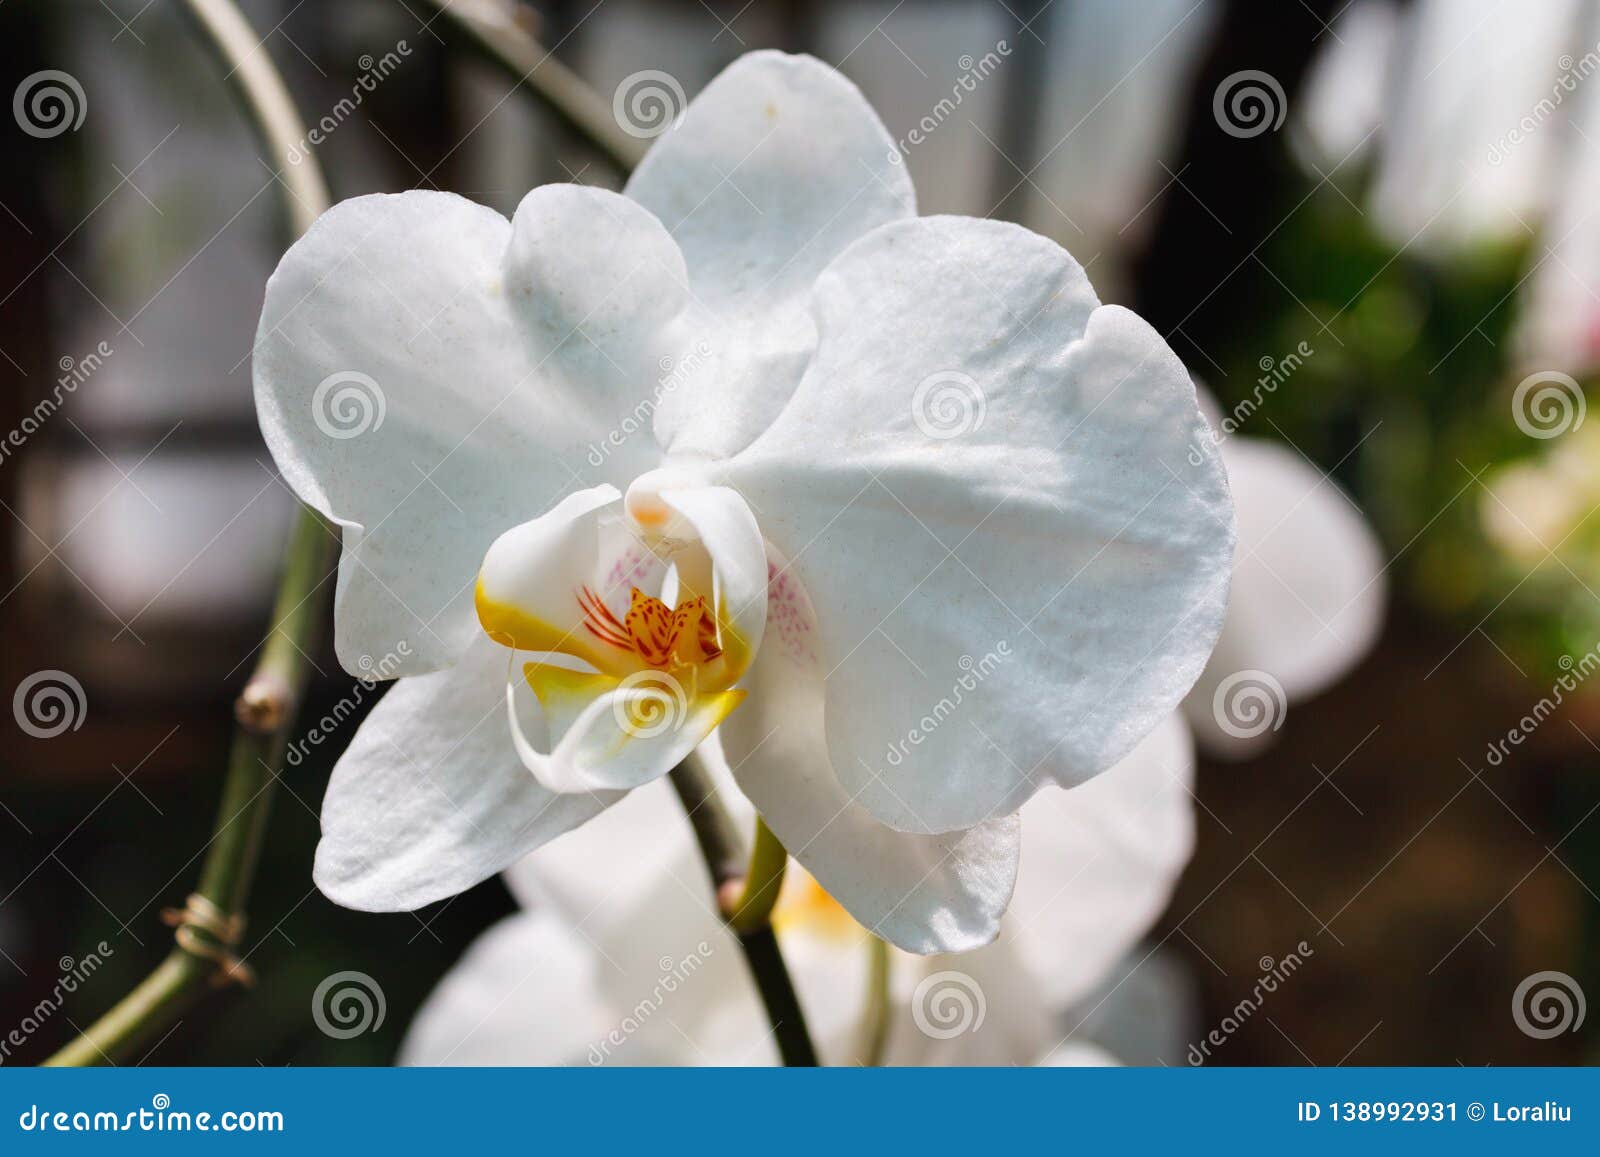 beautiful orchid branch on abstract blurred background